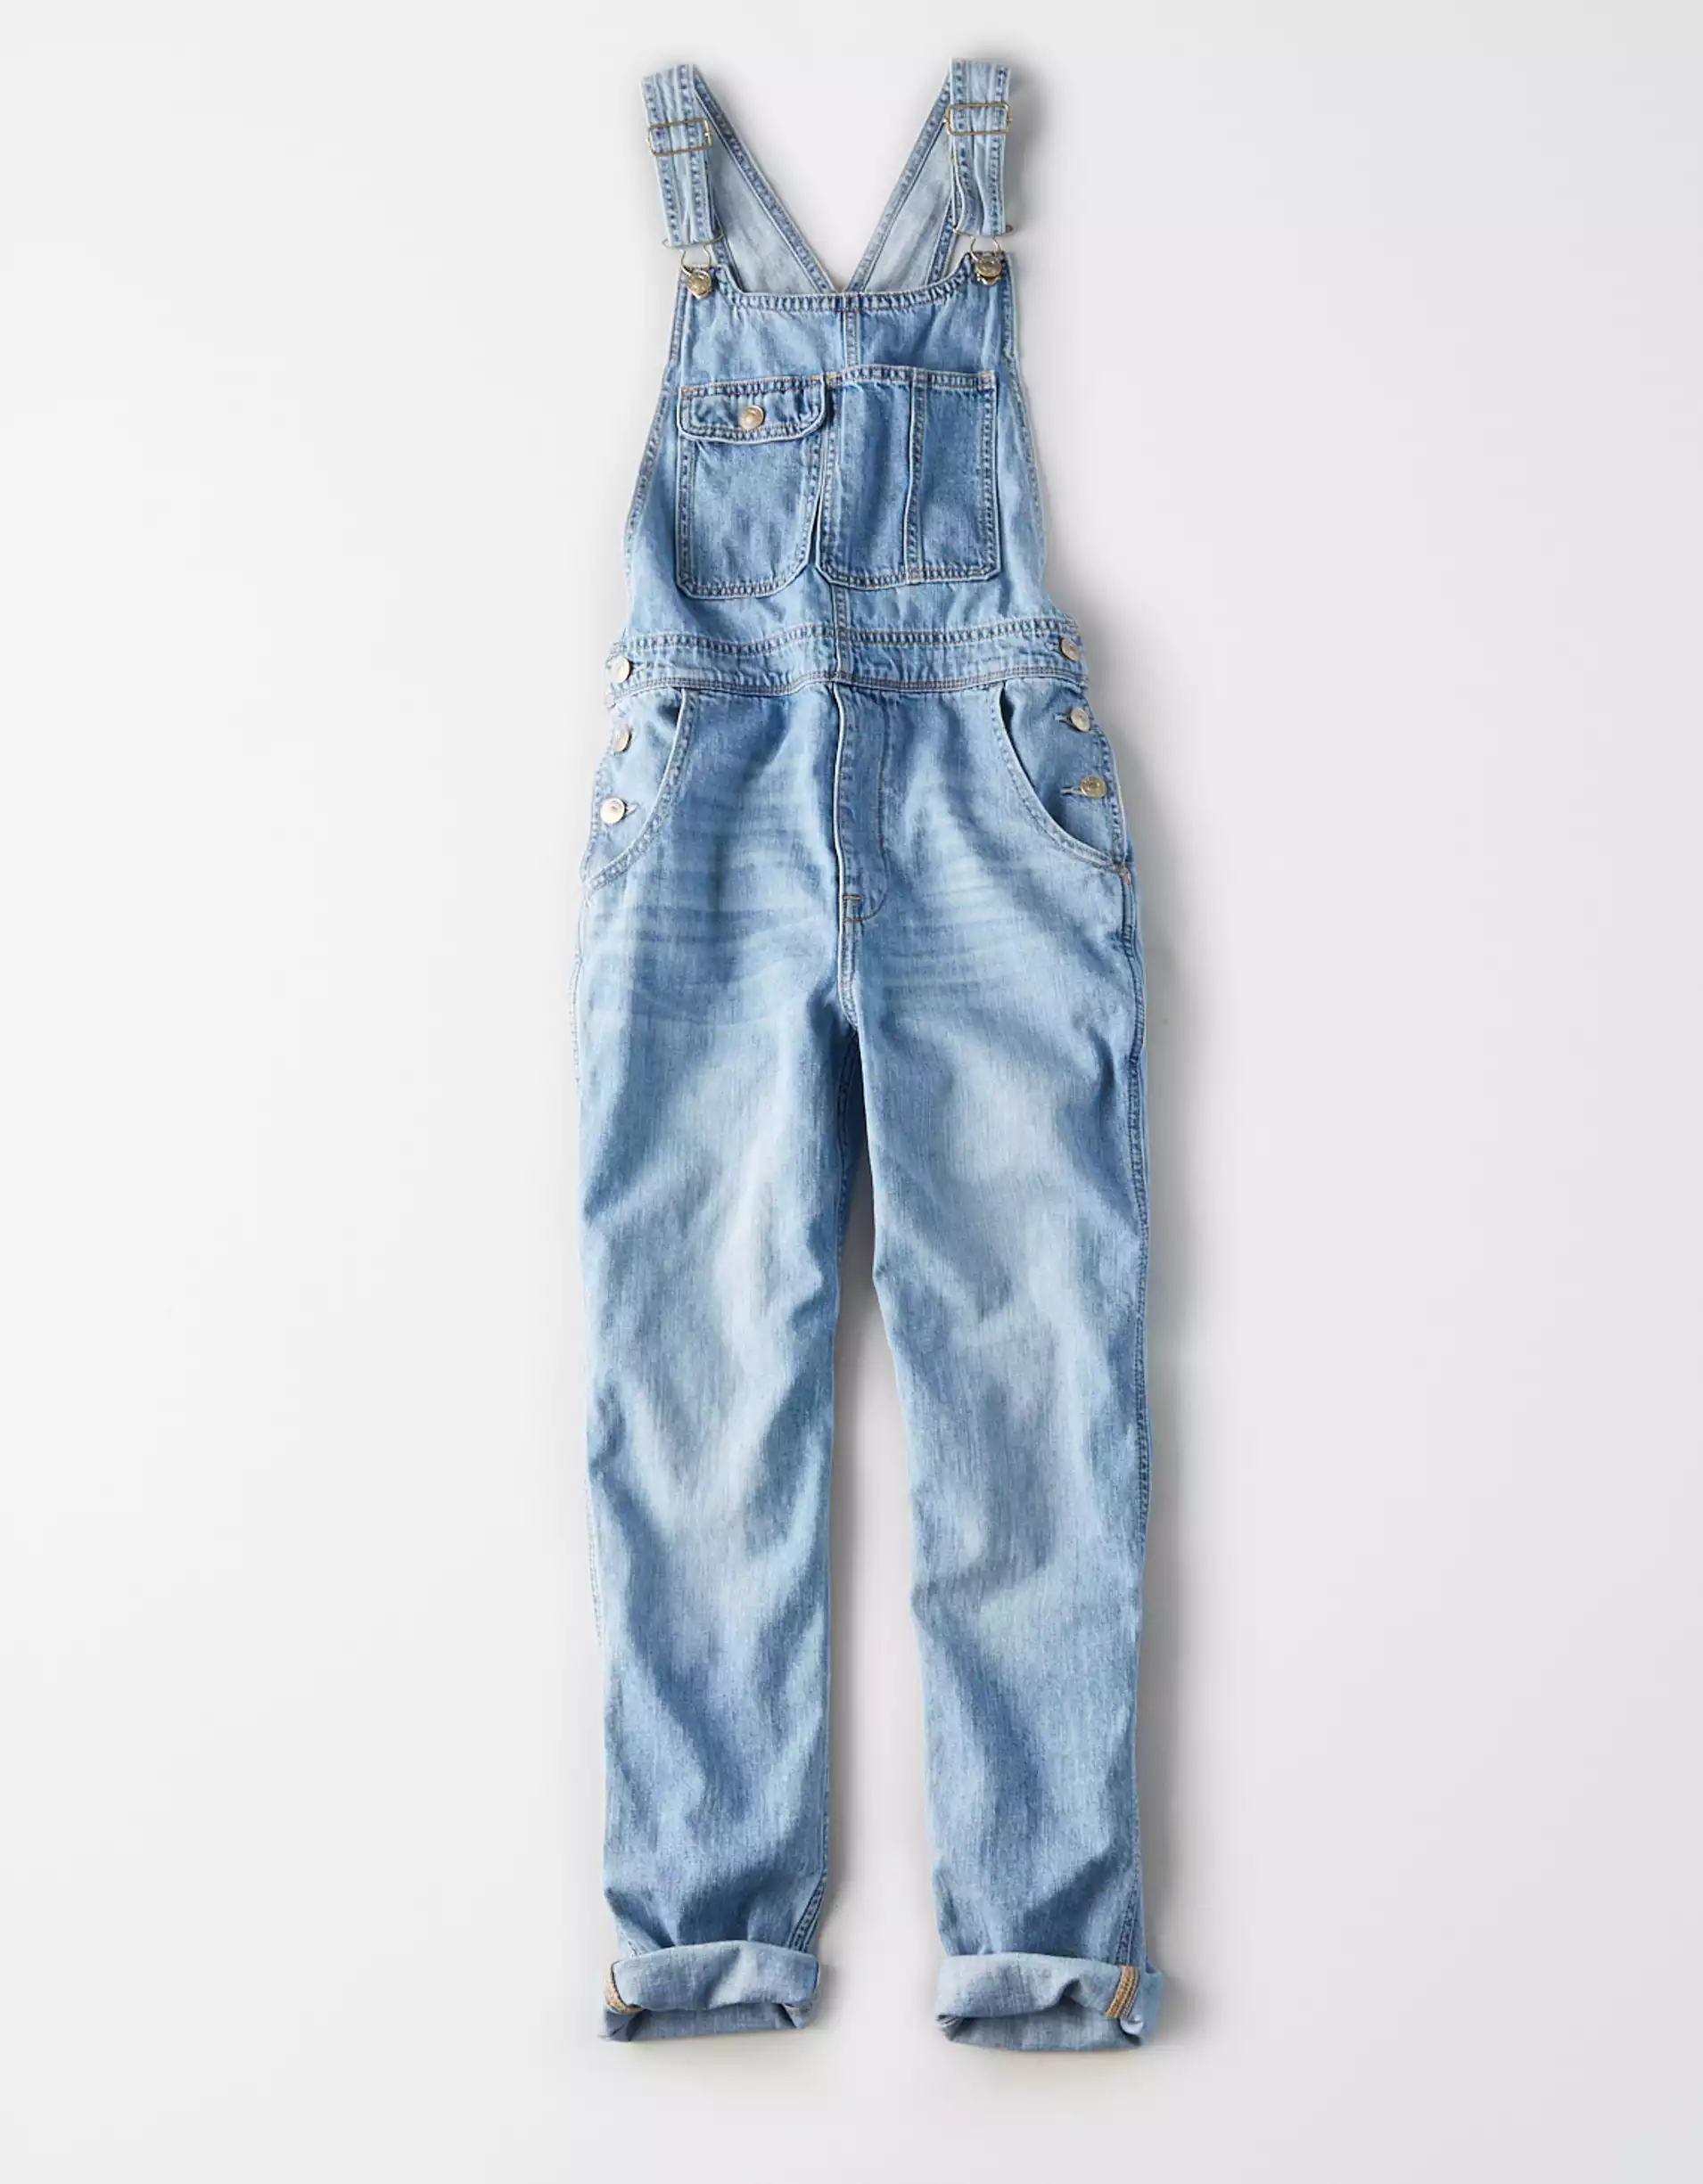 Spring summer fashion 2020: Product photo of American Eagle overalls